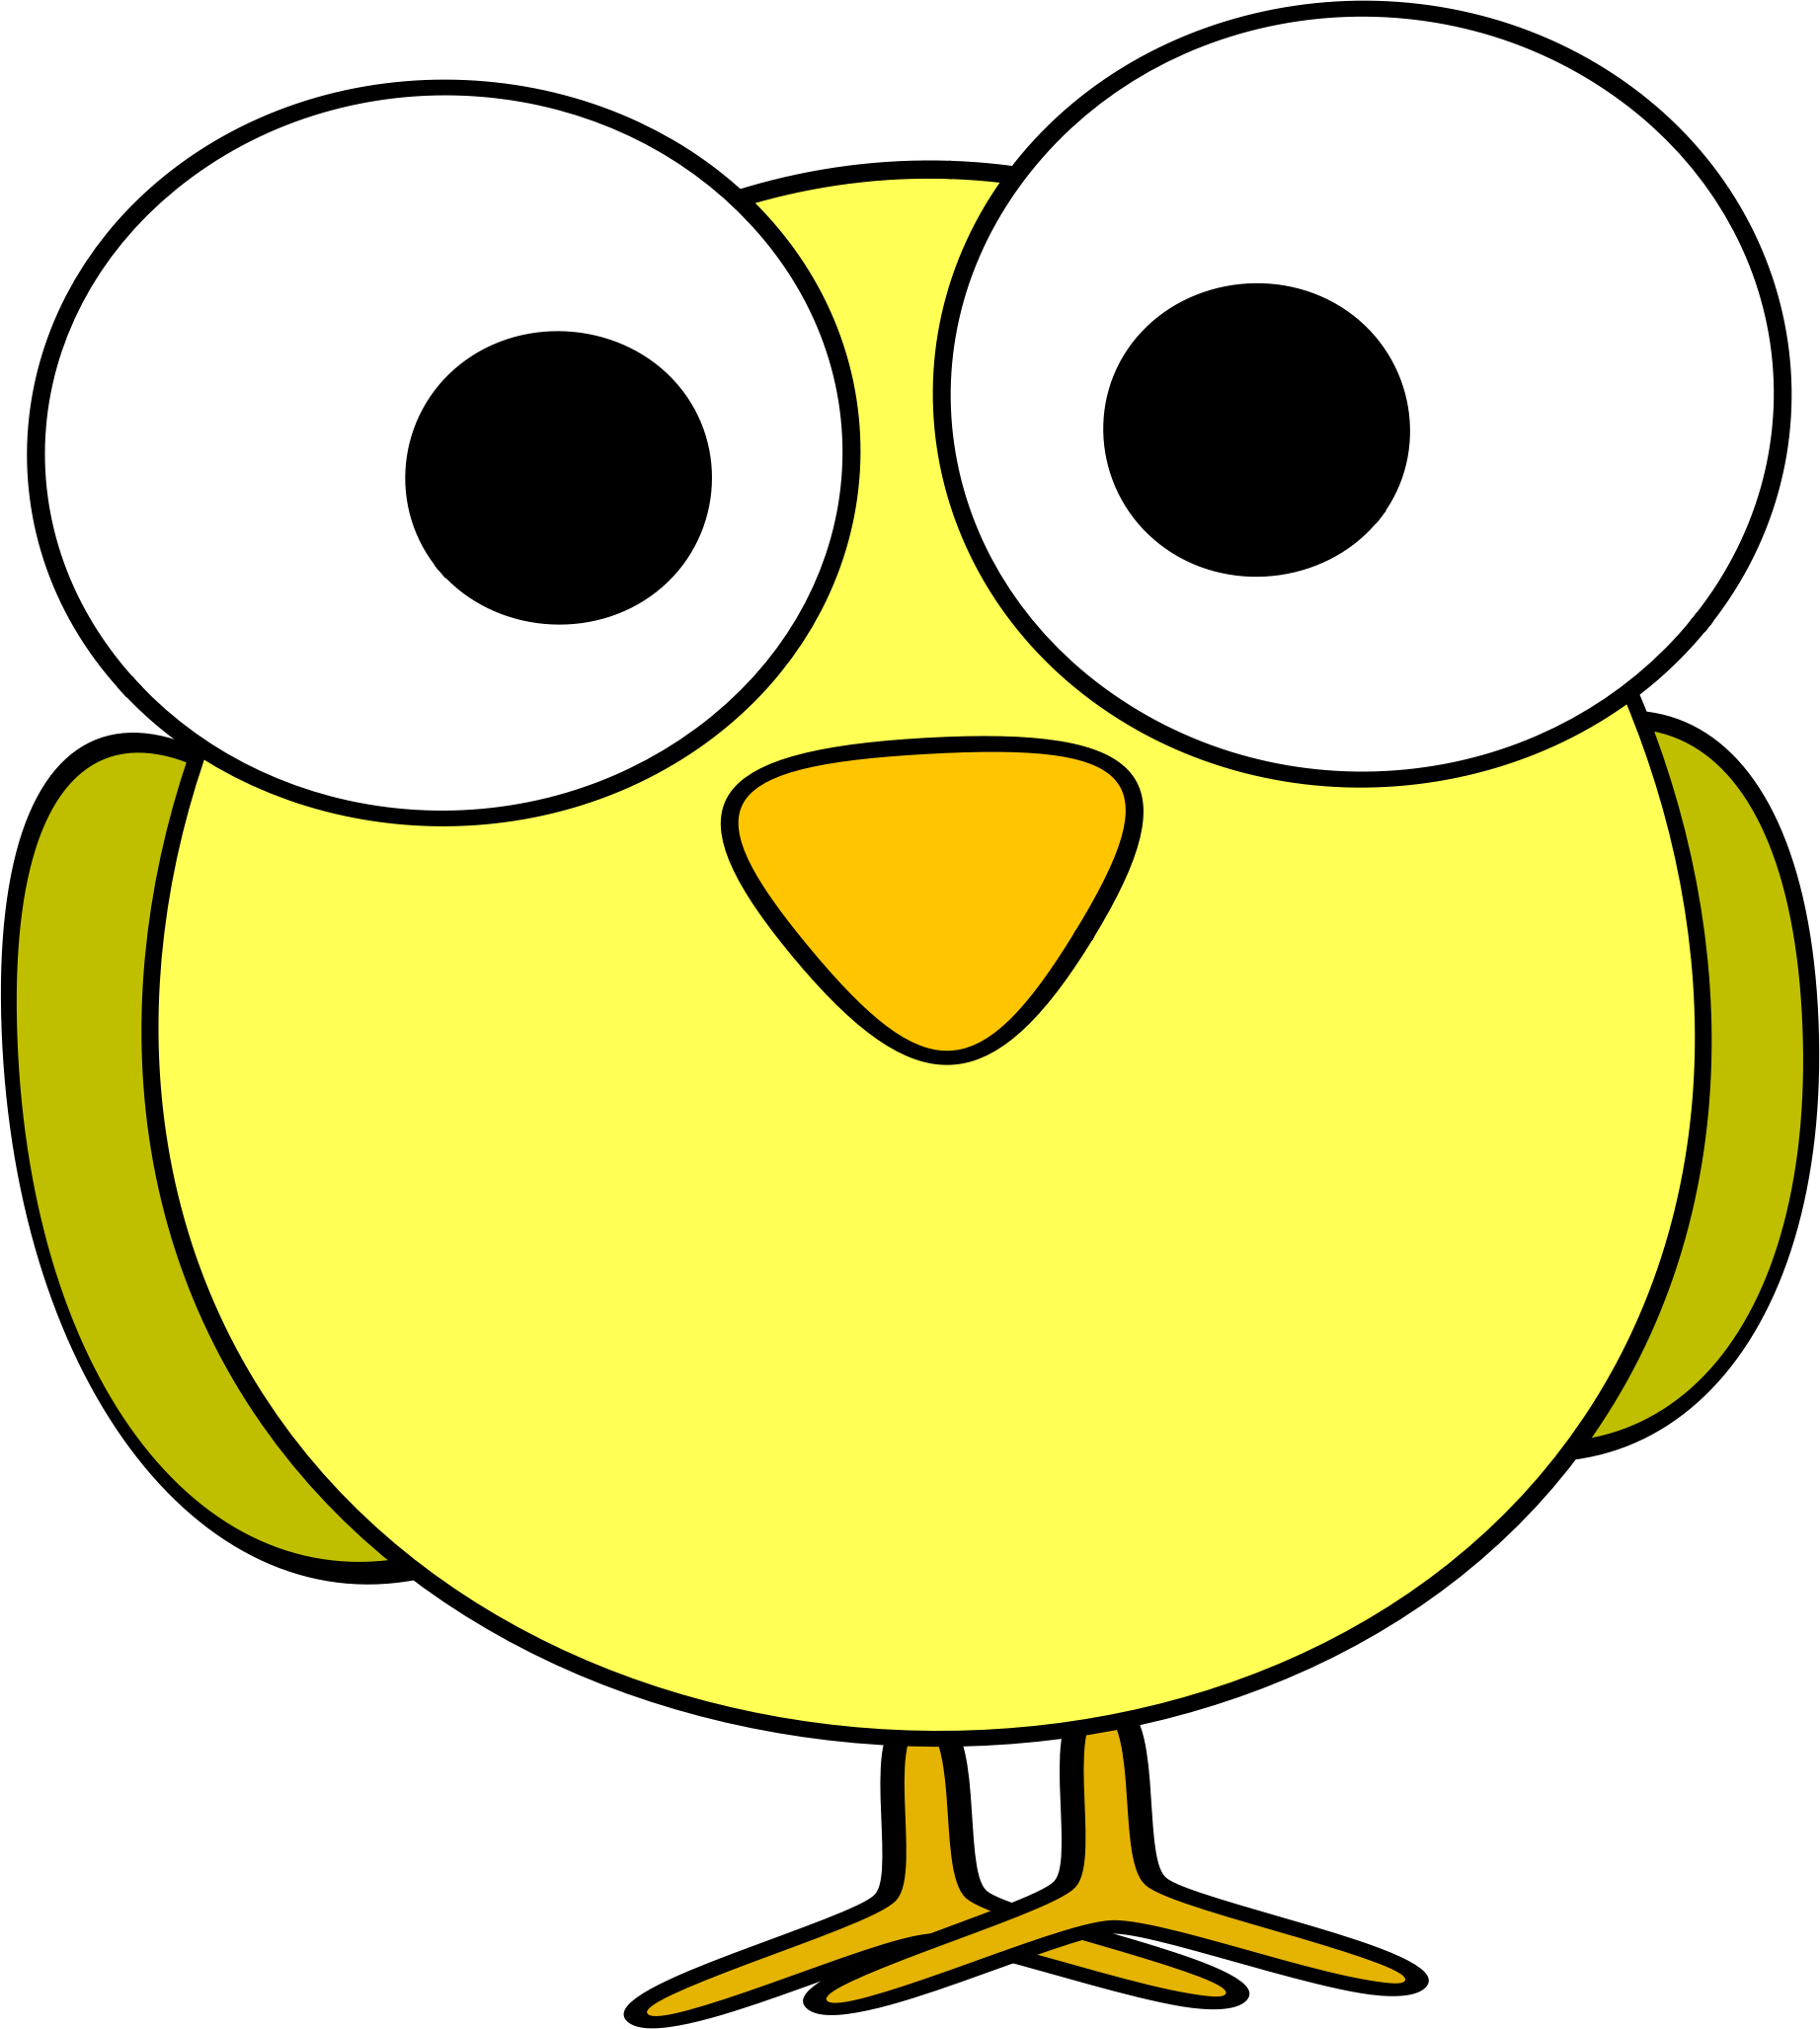 The bird and the big eyes clipart - Clipground